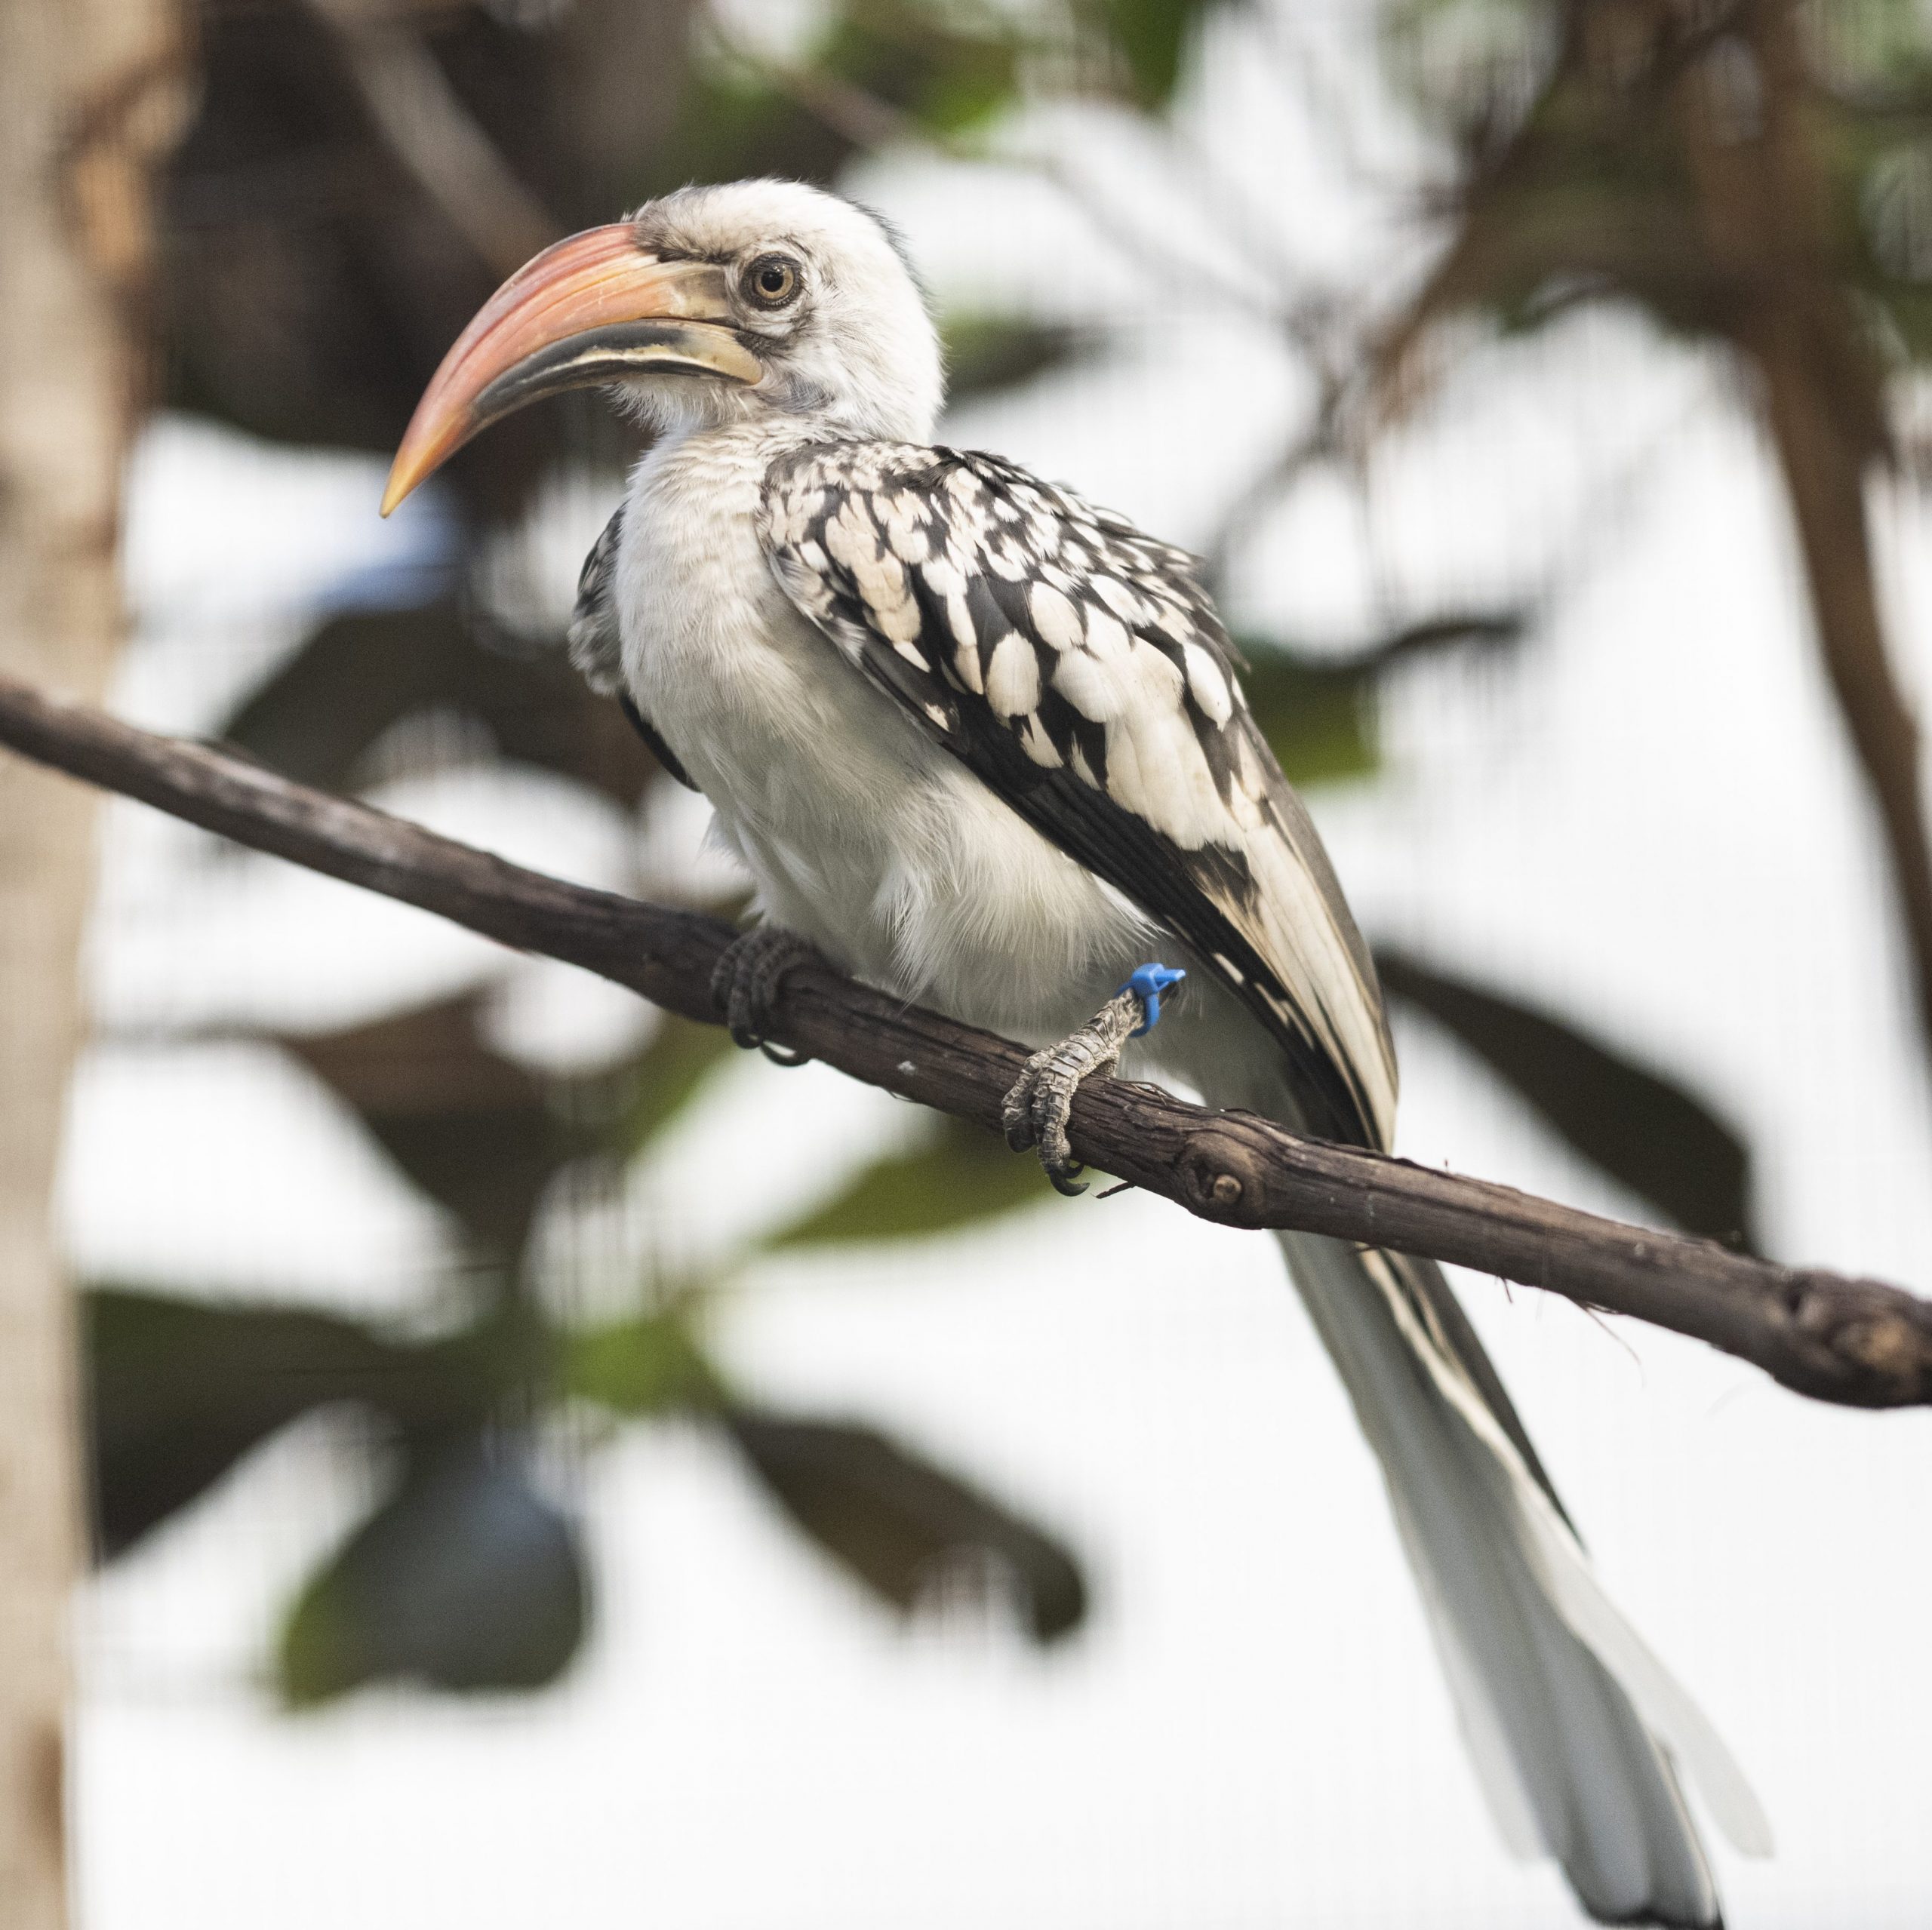 A Red-billed Hornbill perched on a branch